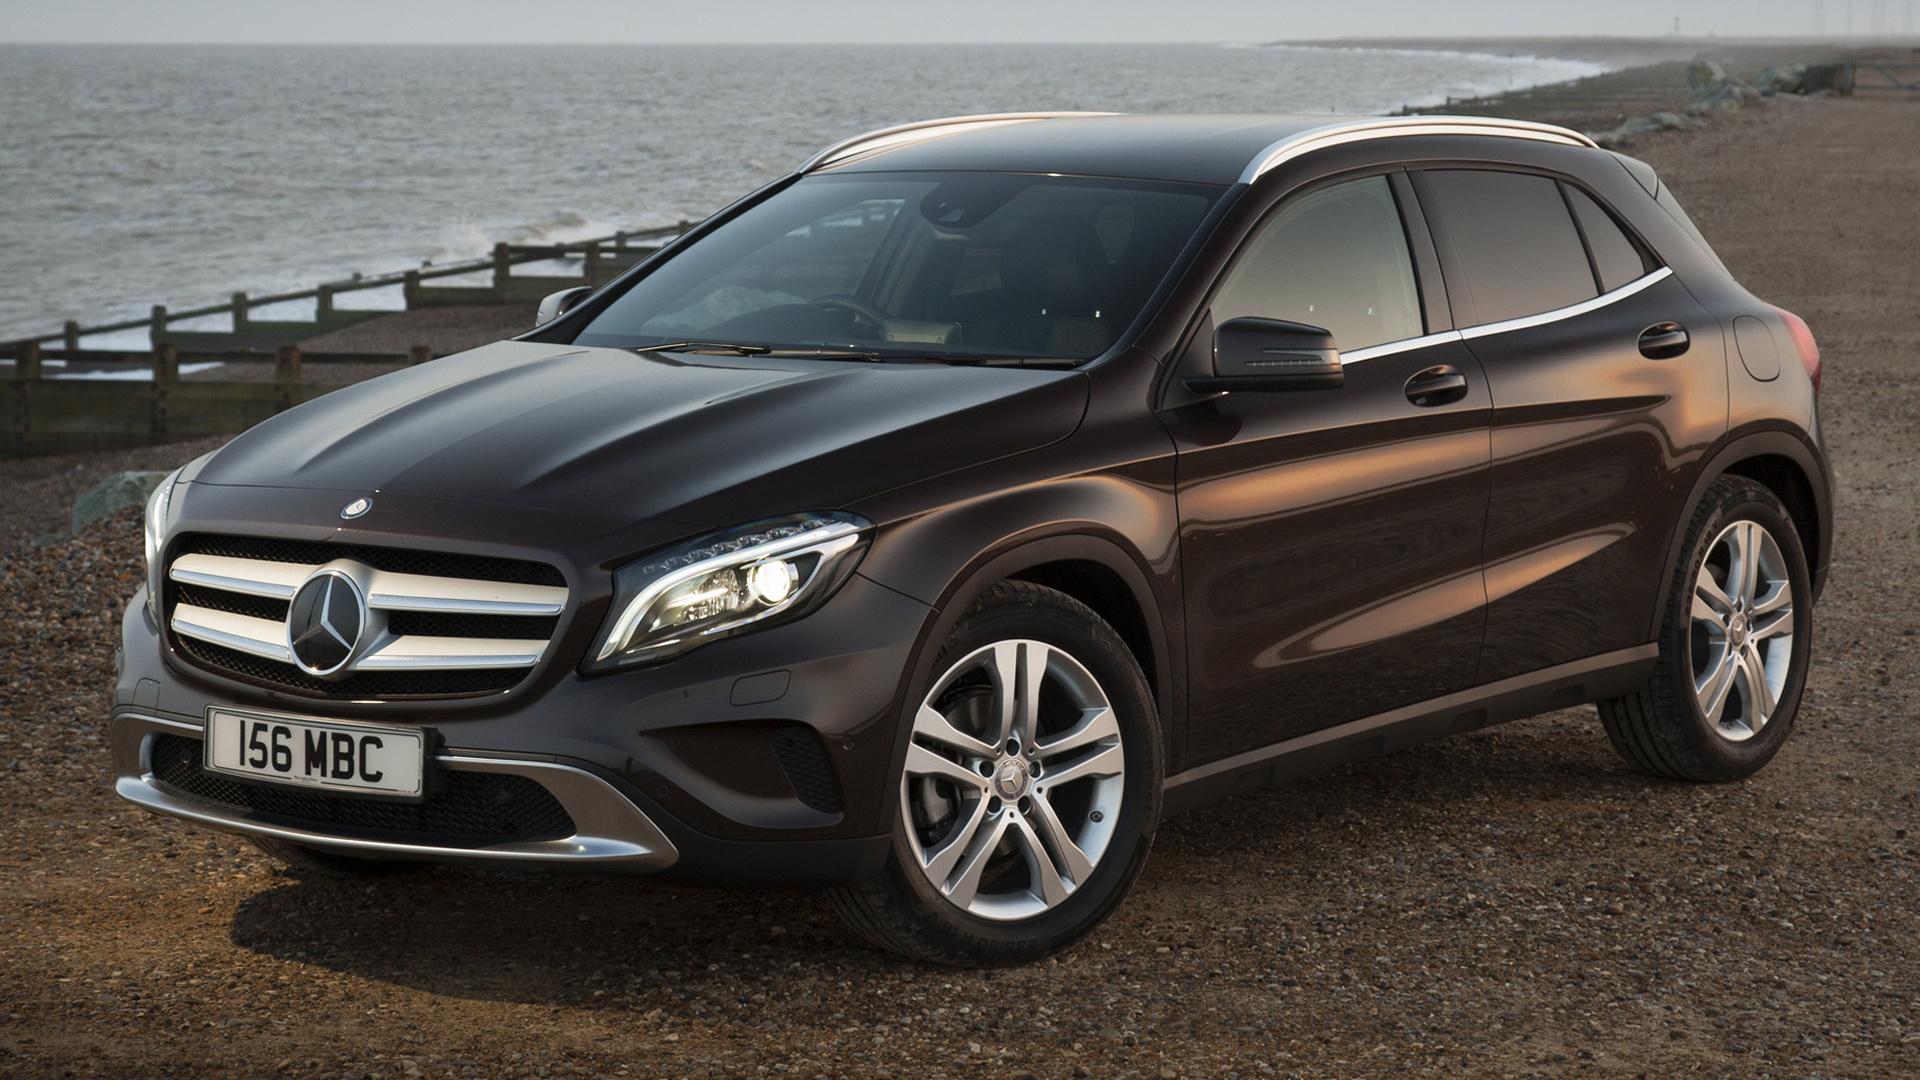 Mercedes Benz GLA Class (UK) And HD Image